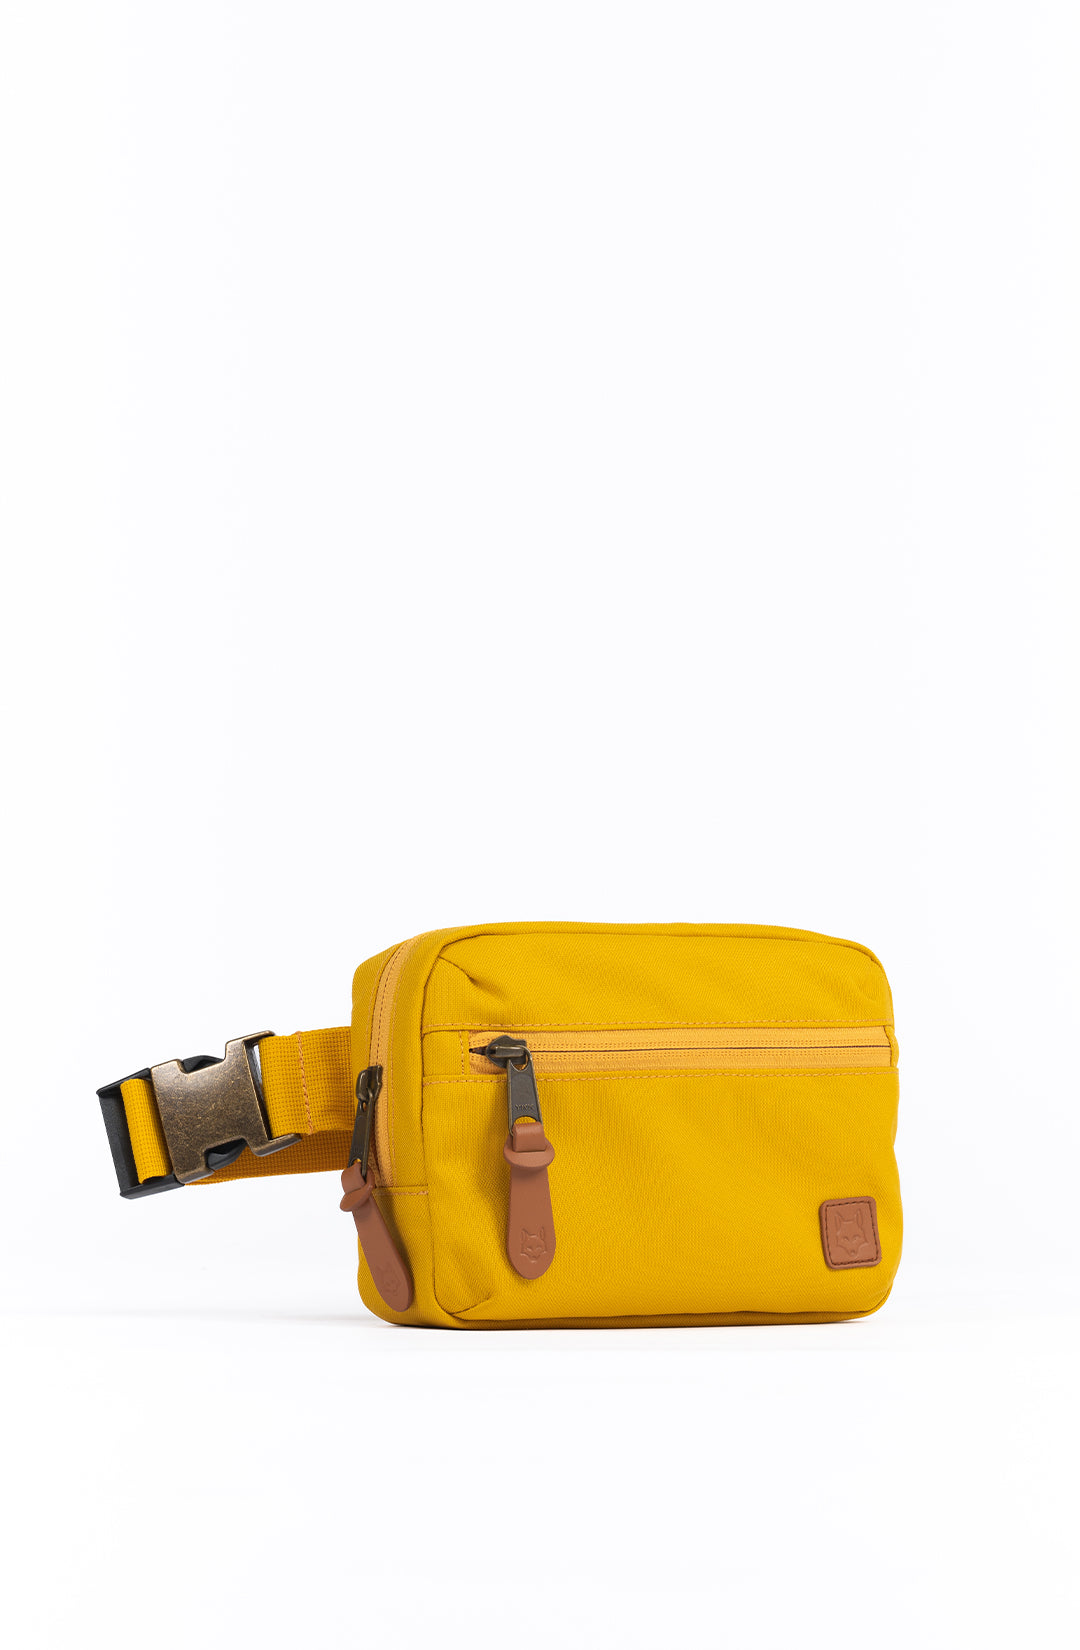 Hip Pack (Saffron) – Product of the North Store